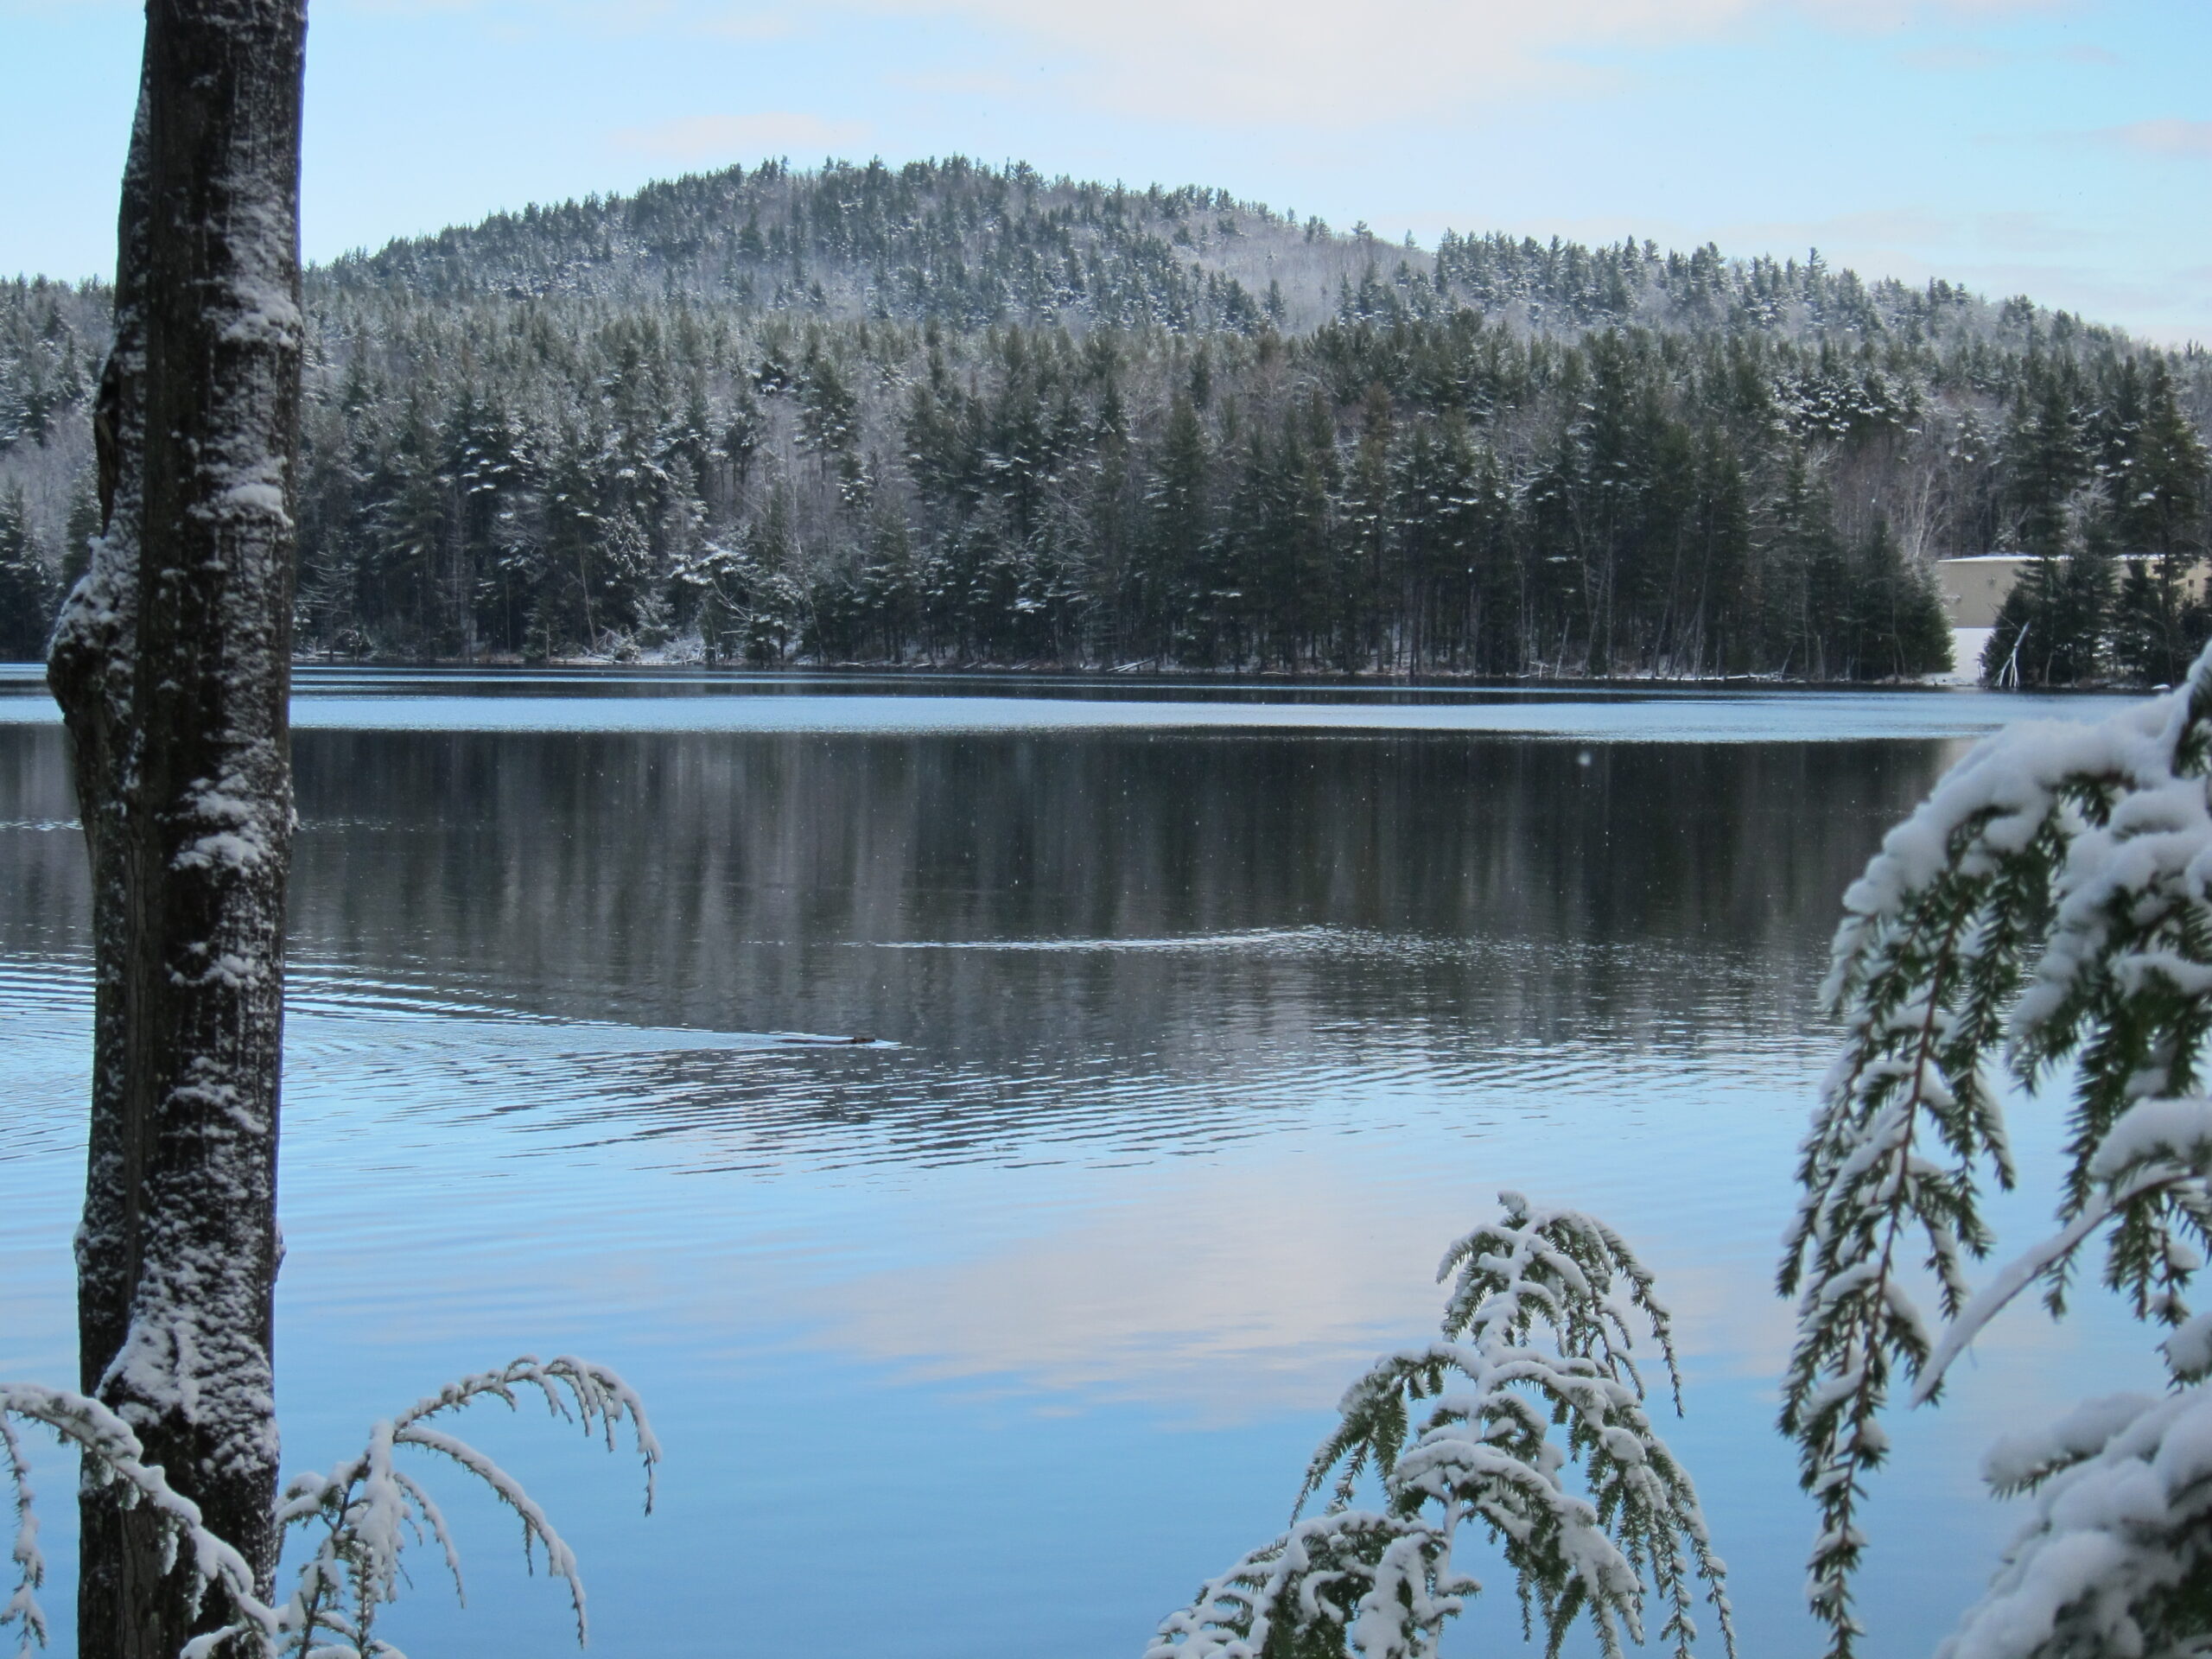 Tranquil winter scene of a lake and snow-covered forest